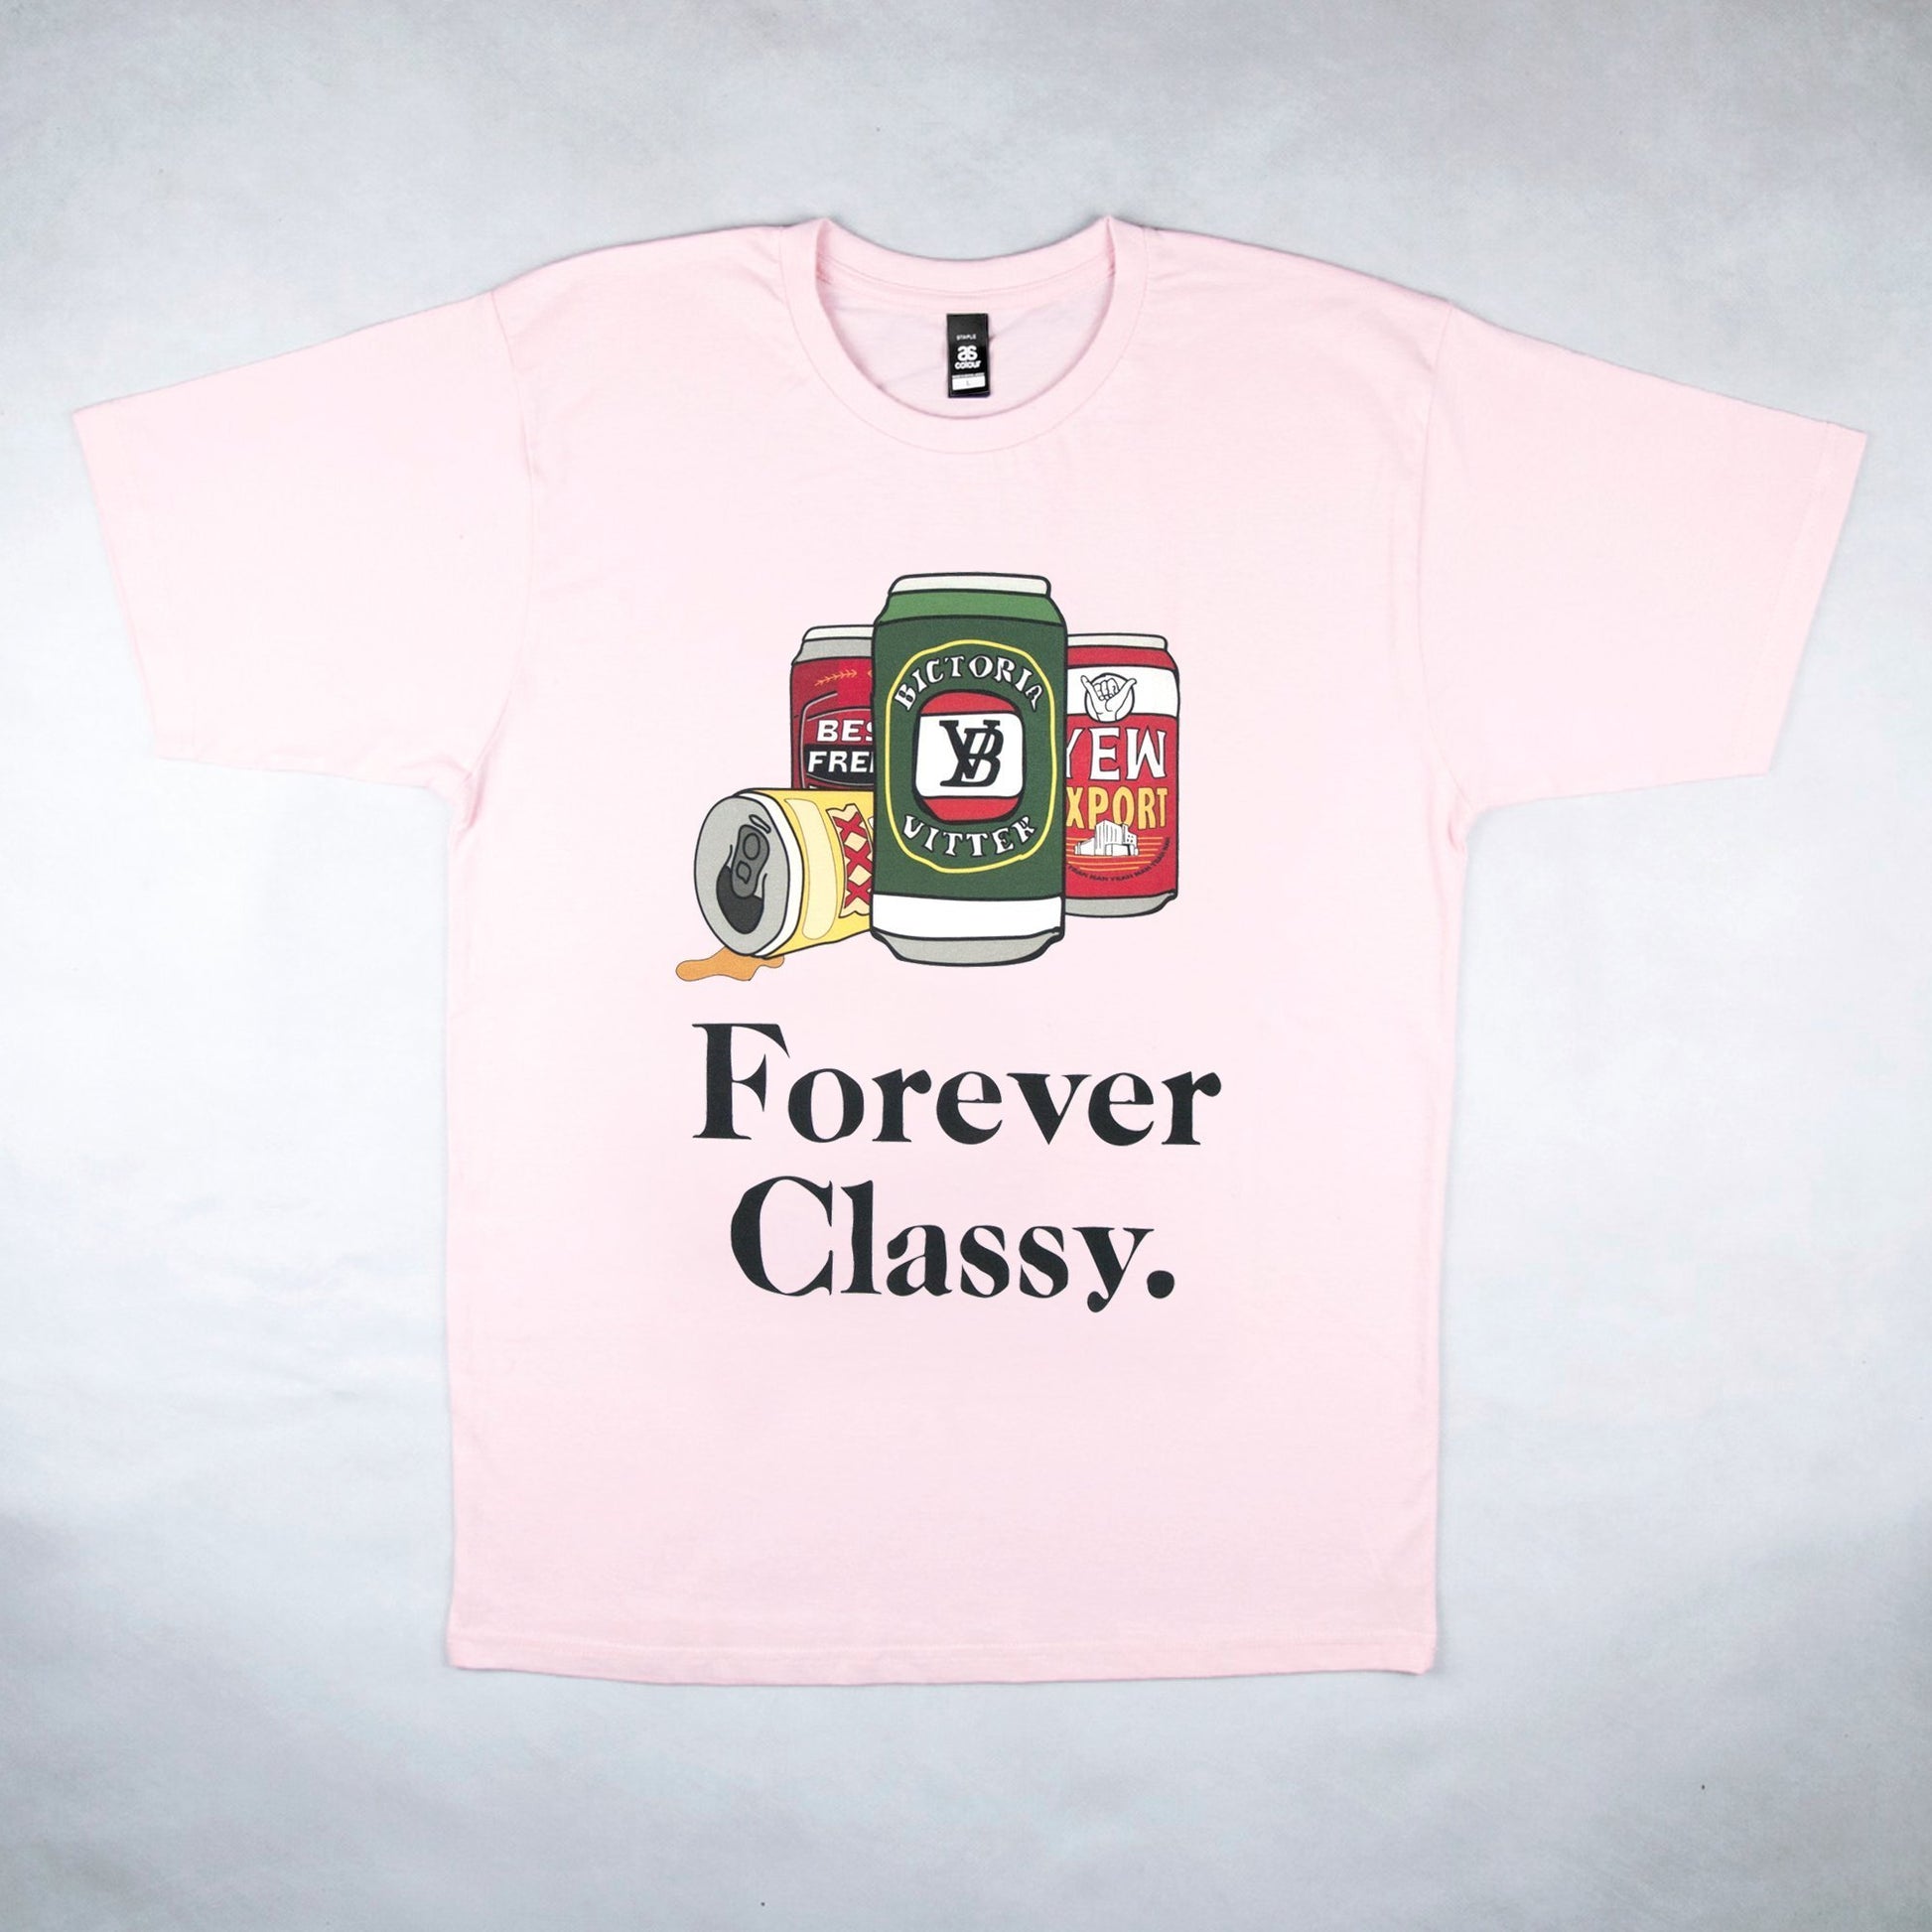 Classy Duds Short Sleeve T-Shirts Forever Classy Two Tee